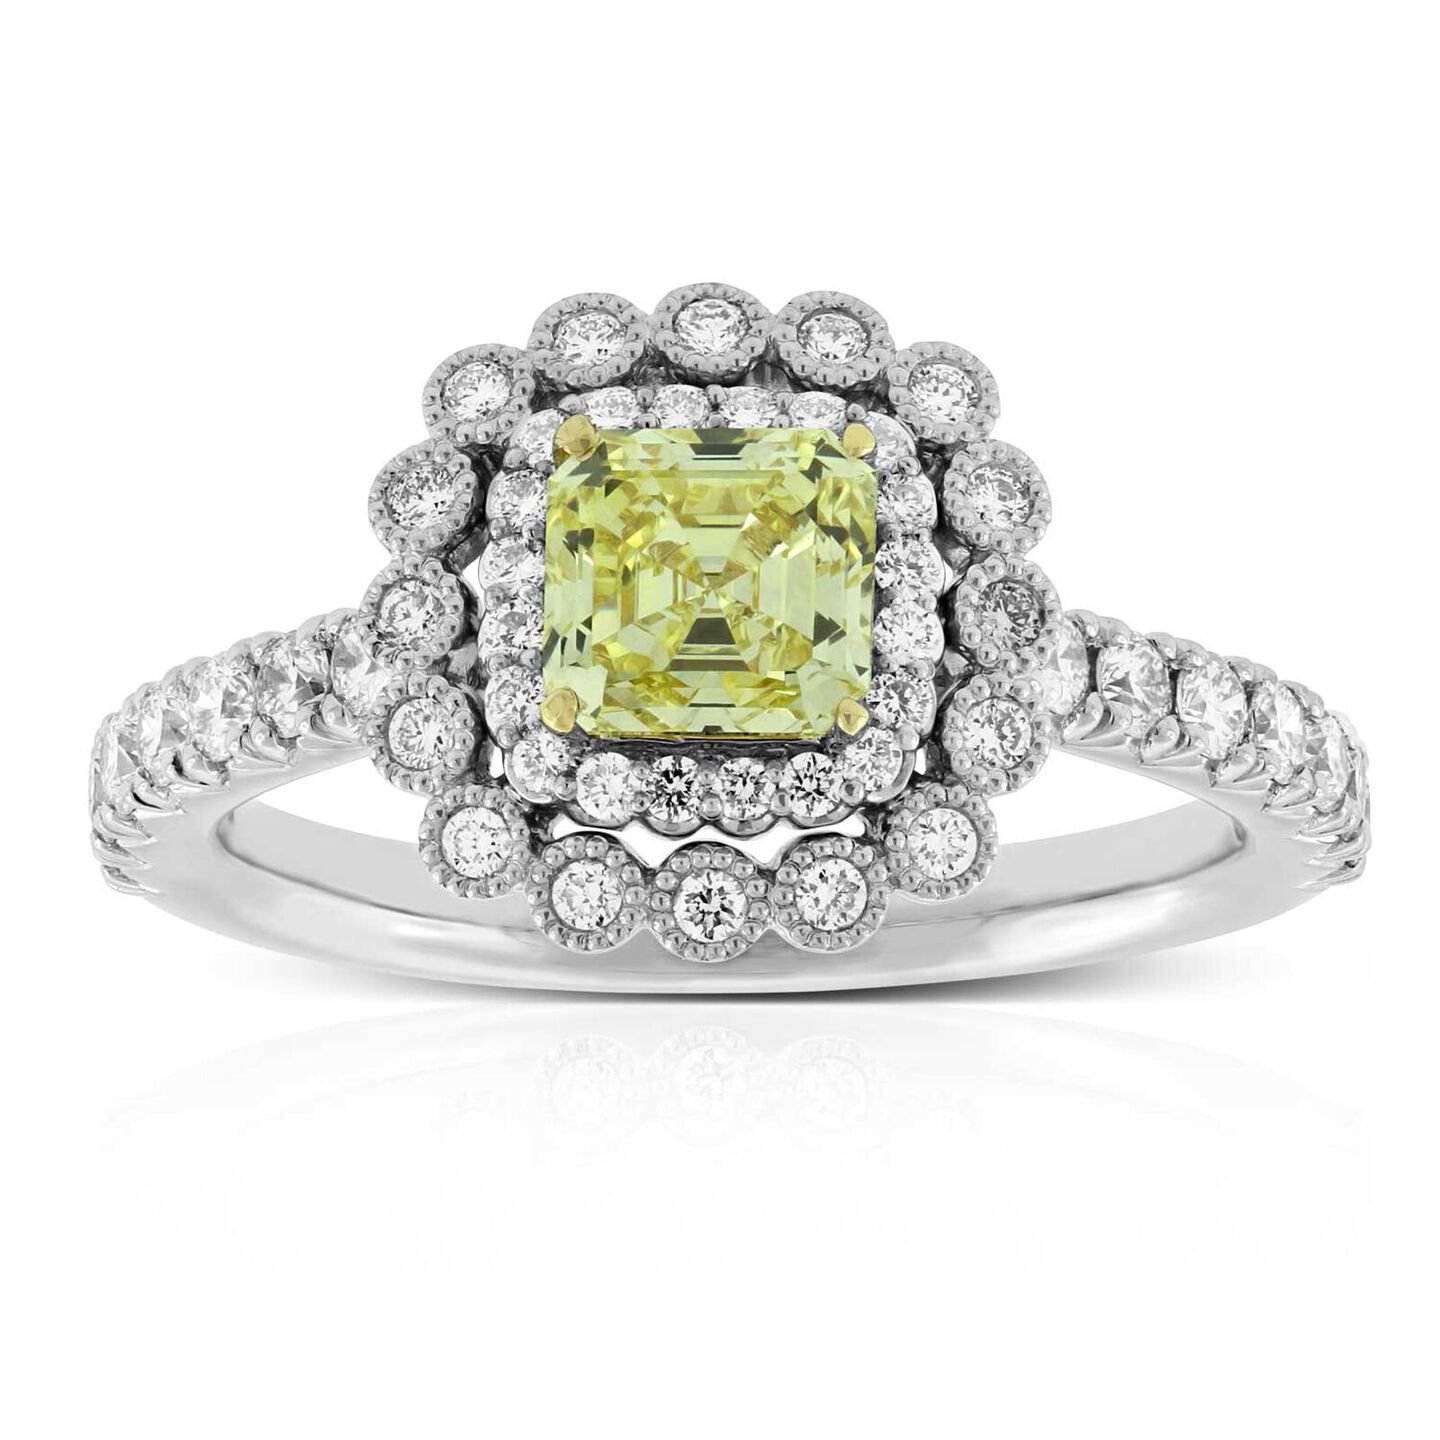 Asscher cut yellow diamond halo engagement ring sparkle against a white background